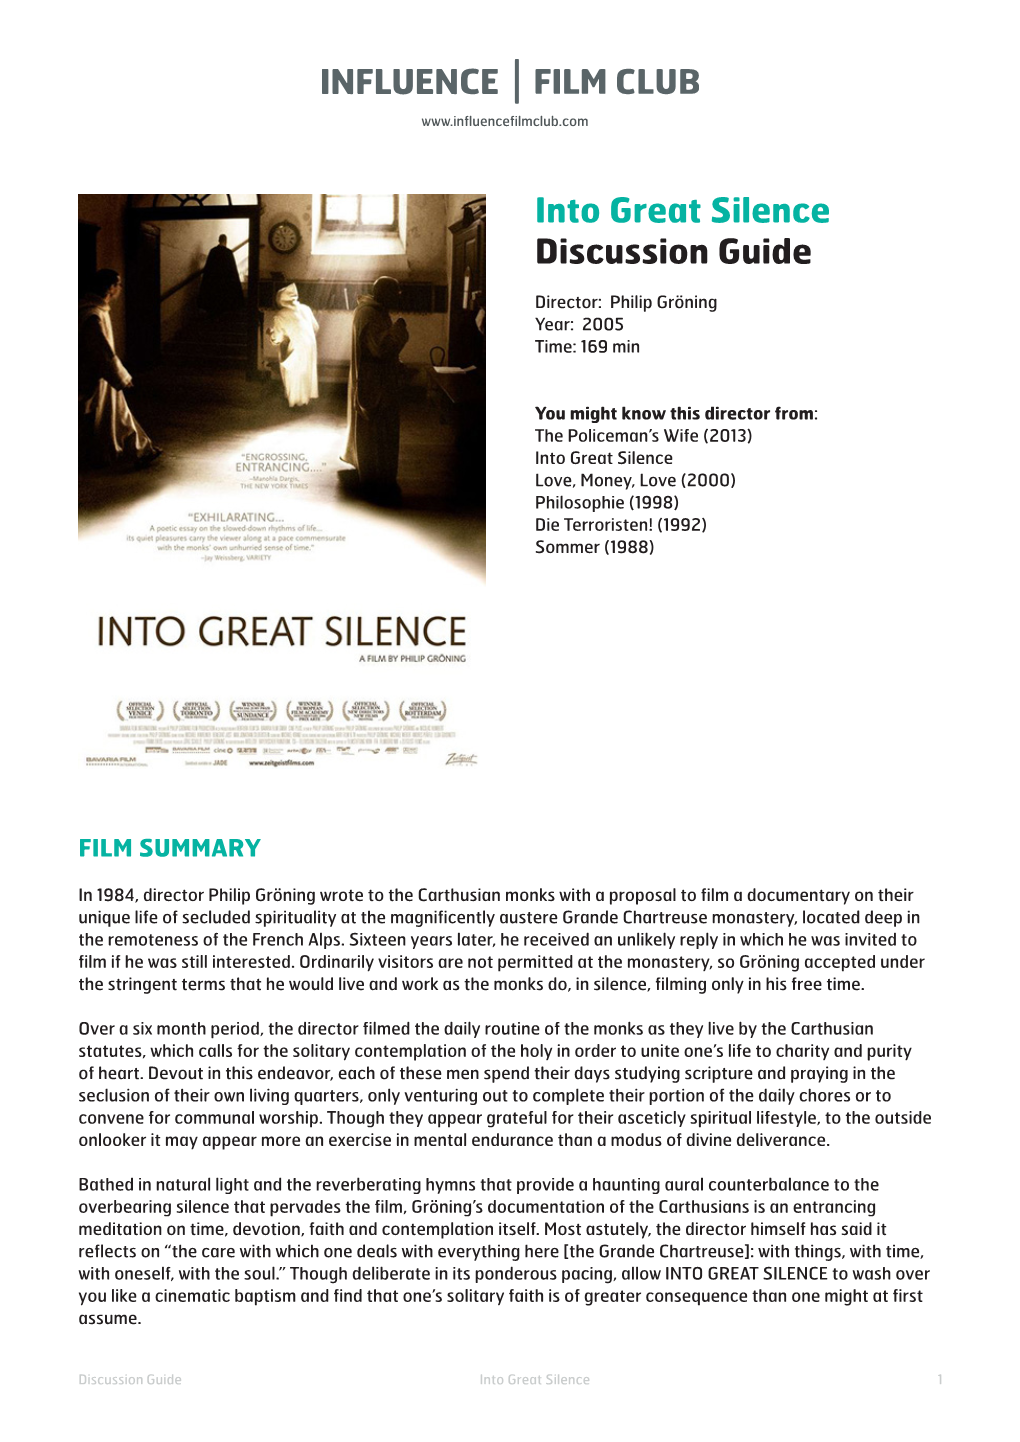 Into Great Silence Discussion Guide